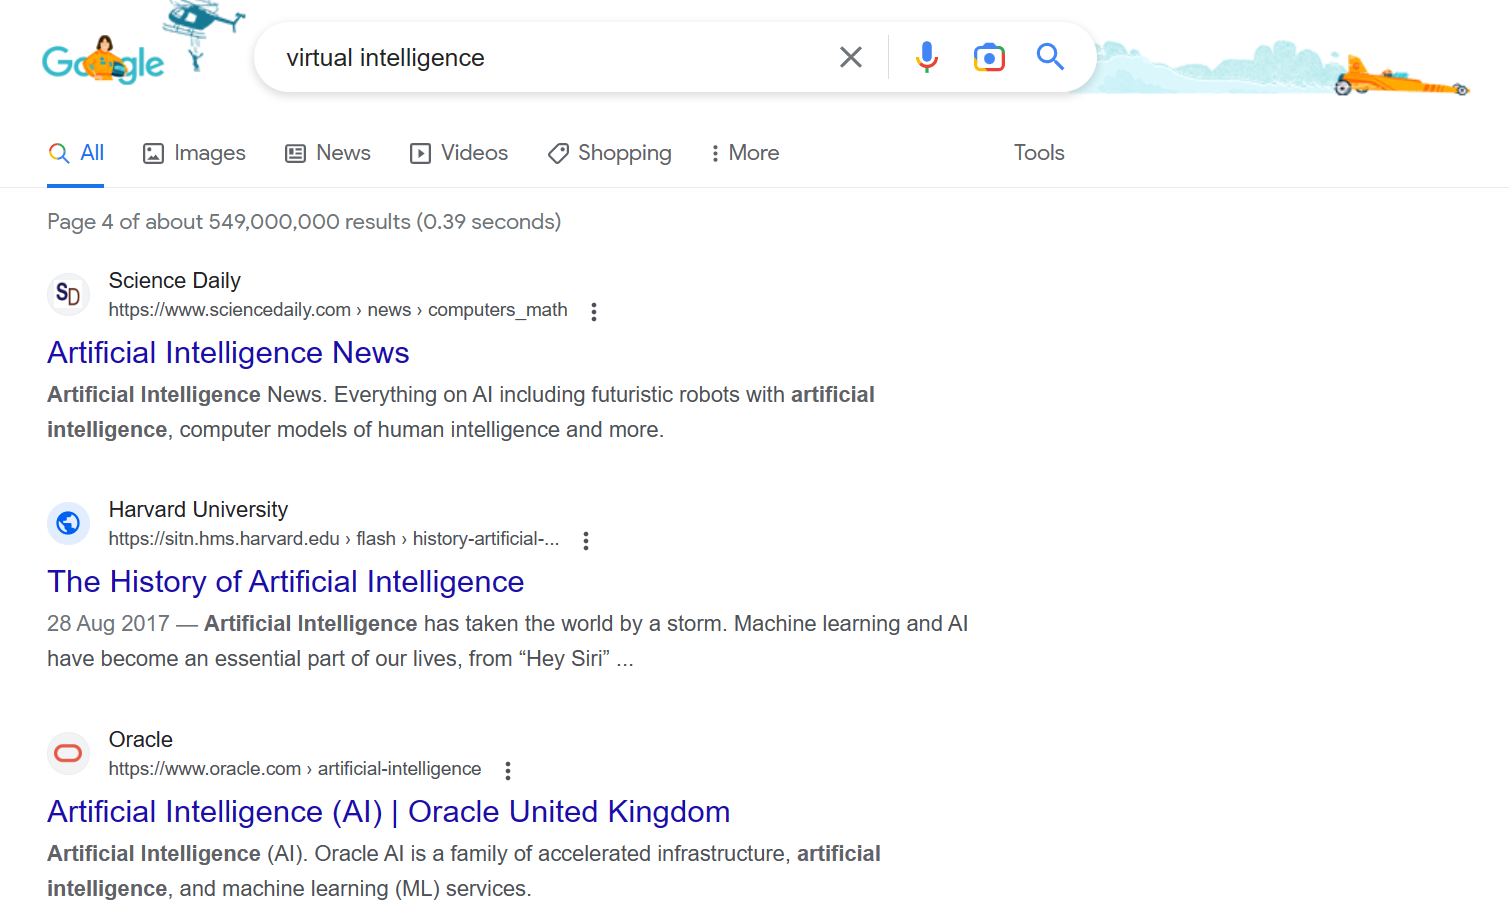 A Google search for the term 'Virtual Intelligence' that generates 549,000,000 results mostly about AI.